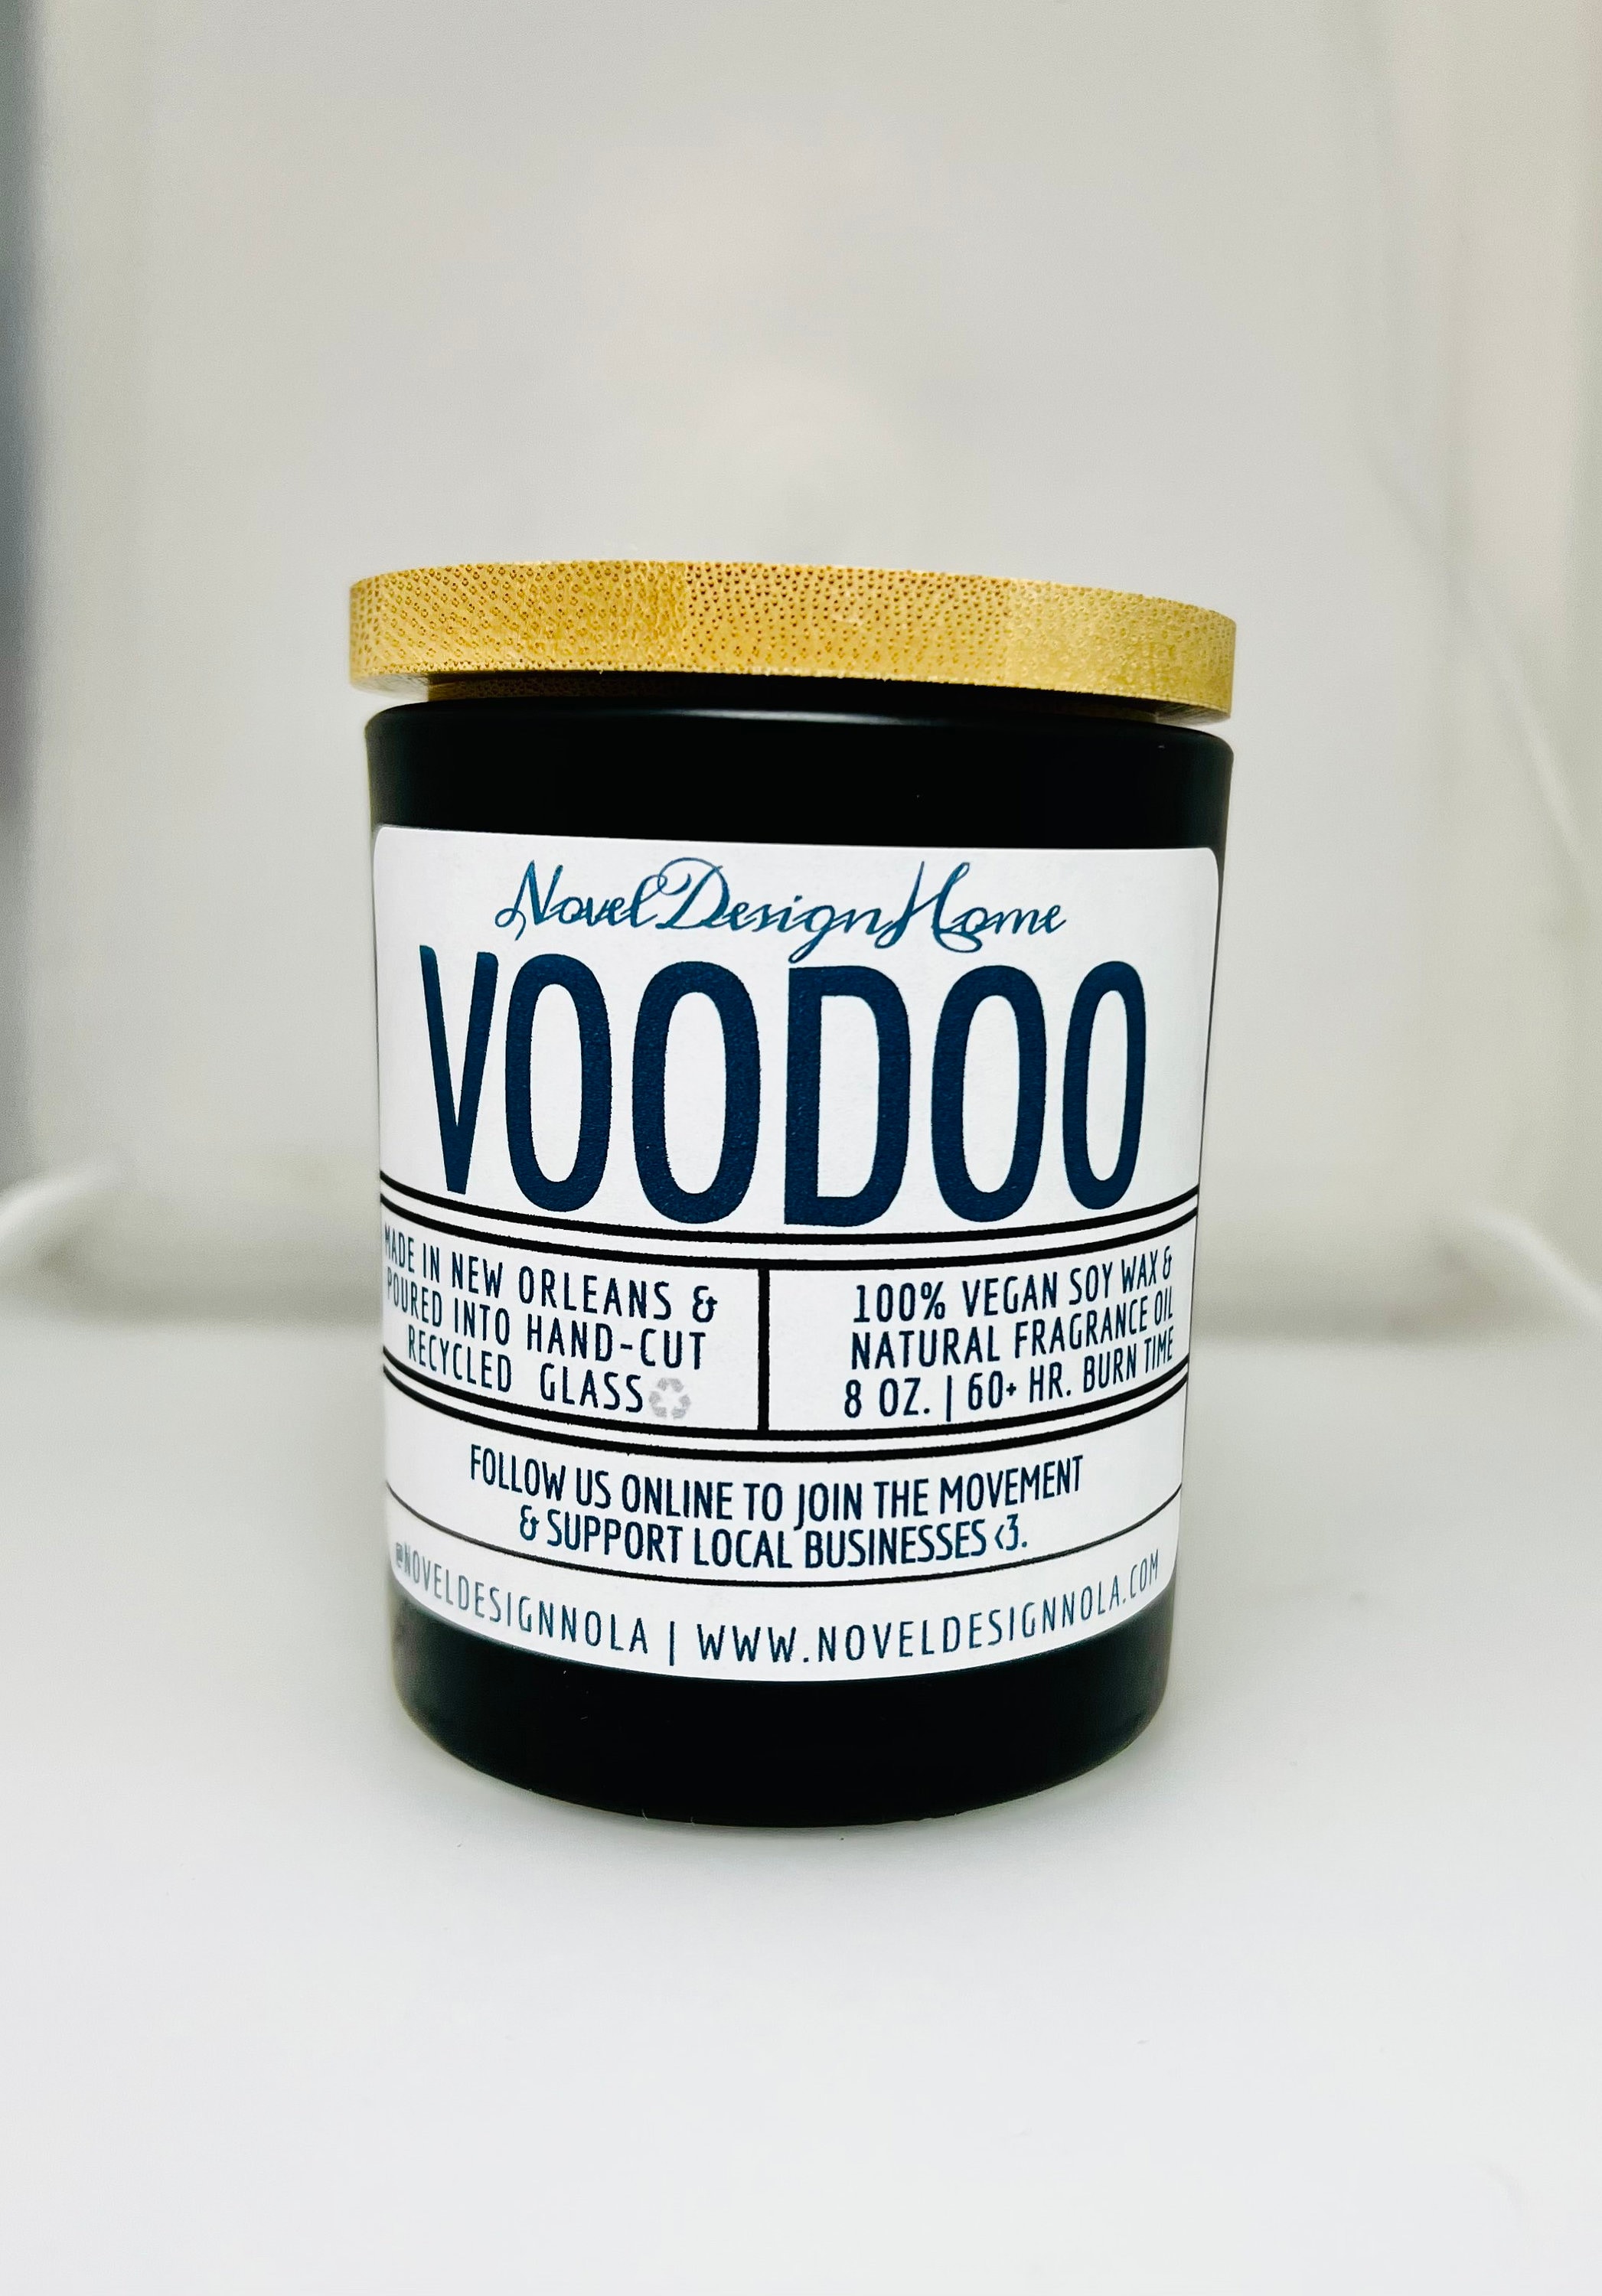 Voodoo Ritual Kit – by VooDoo Authentica, New Orleans, LA – Dr. Tumblety's